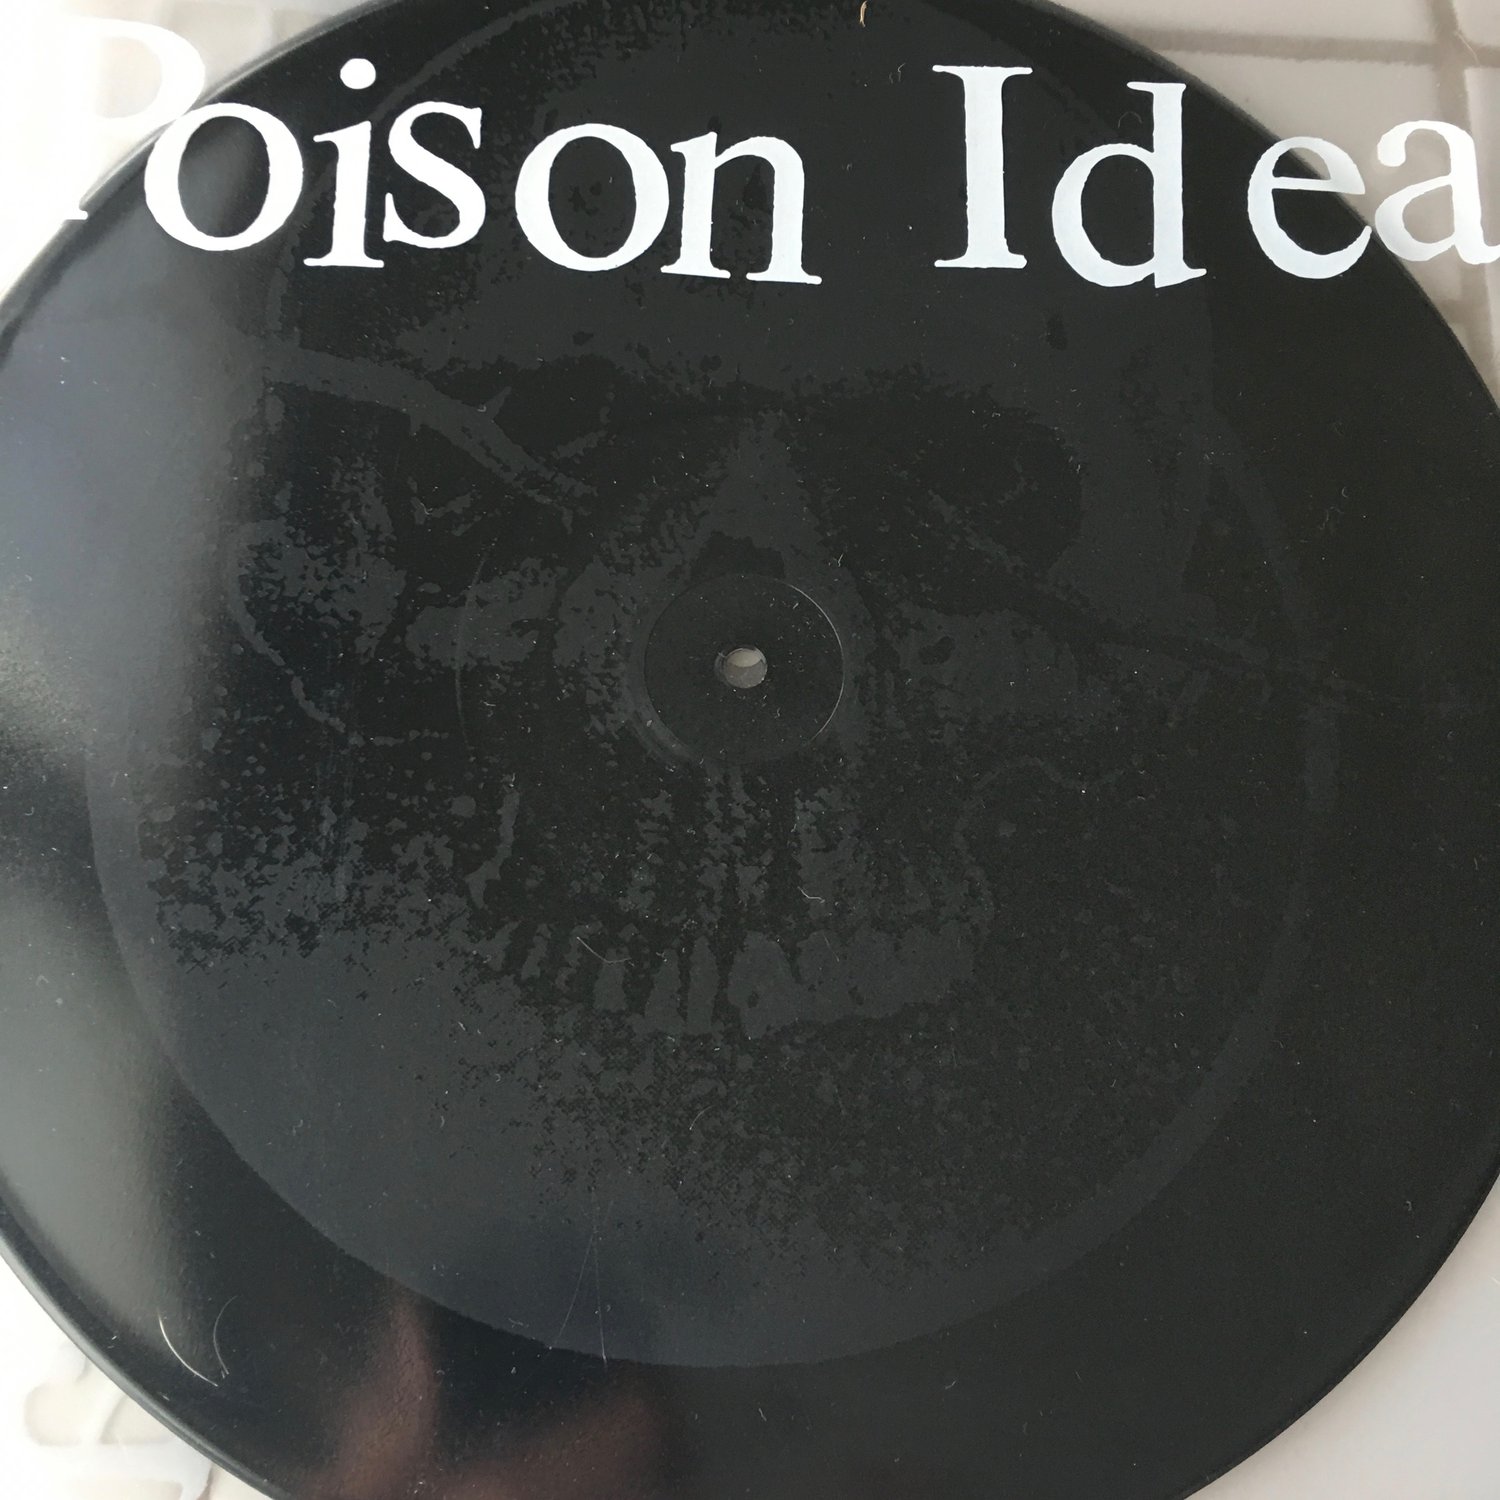 Image of Poison Idea-"Calling All Ghosts" 12" ep with etching 2016